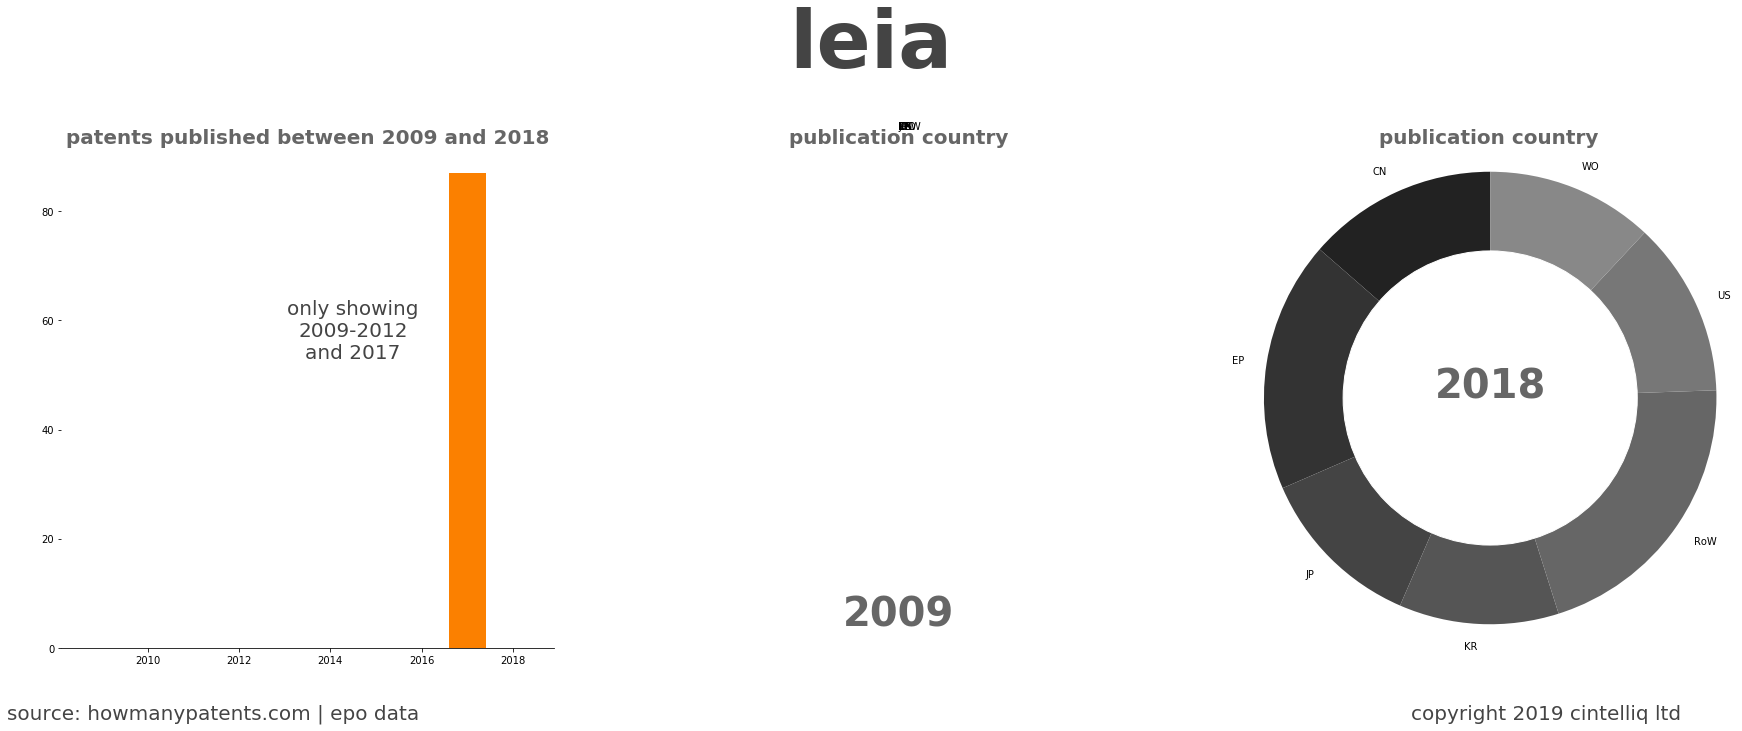 summary of patents for Leia